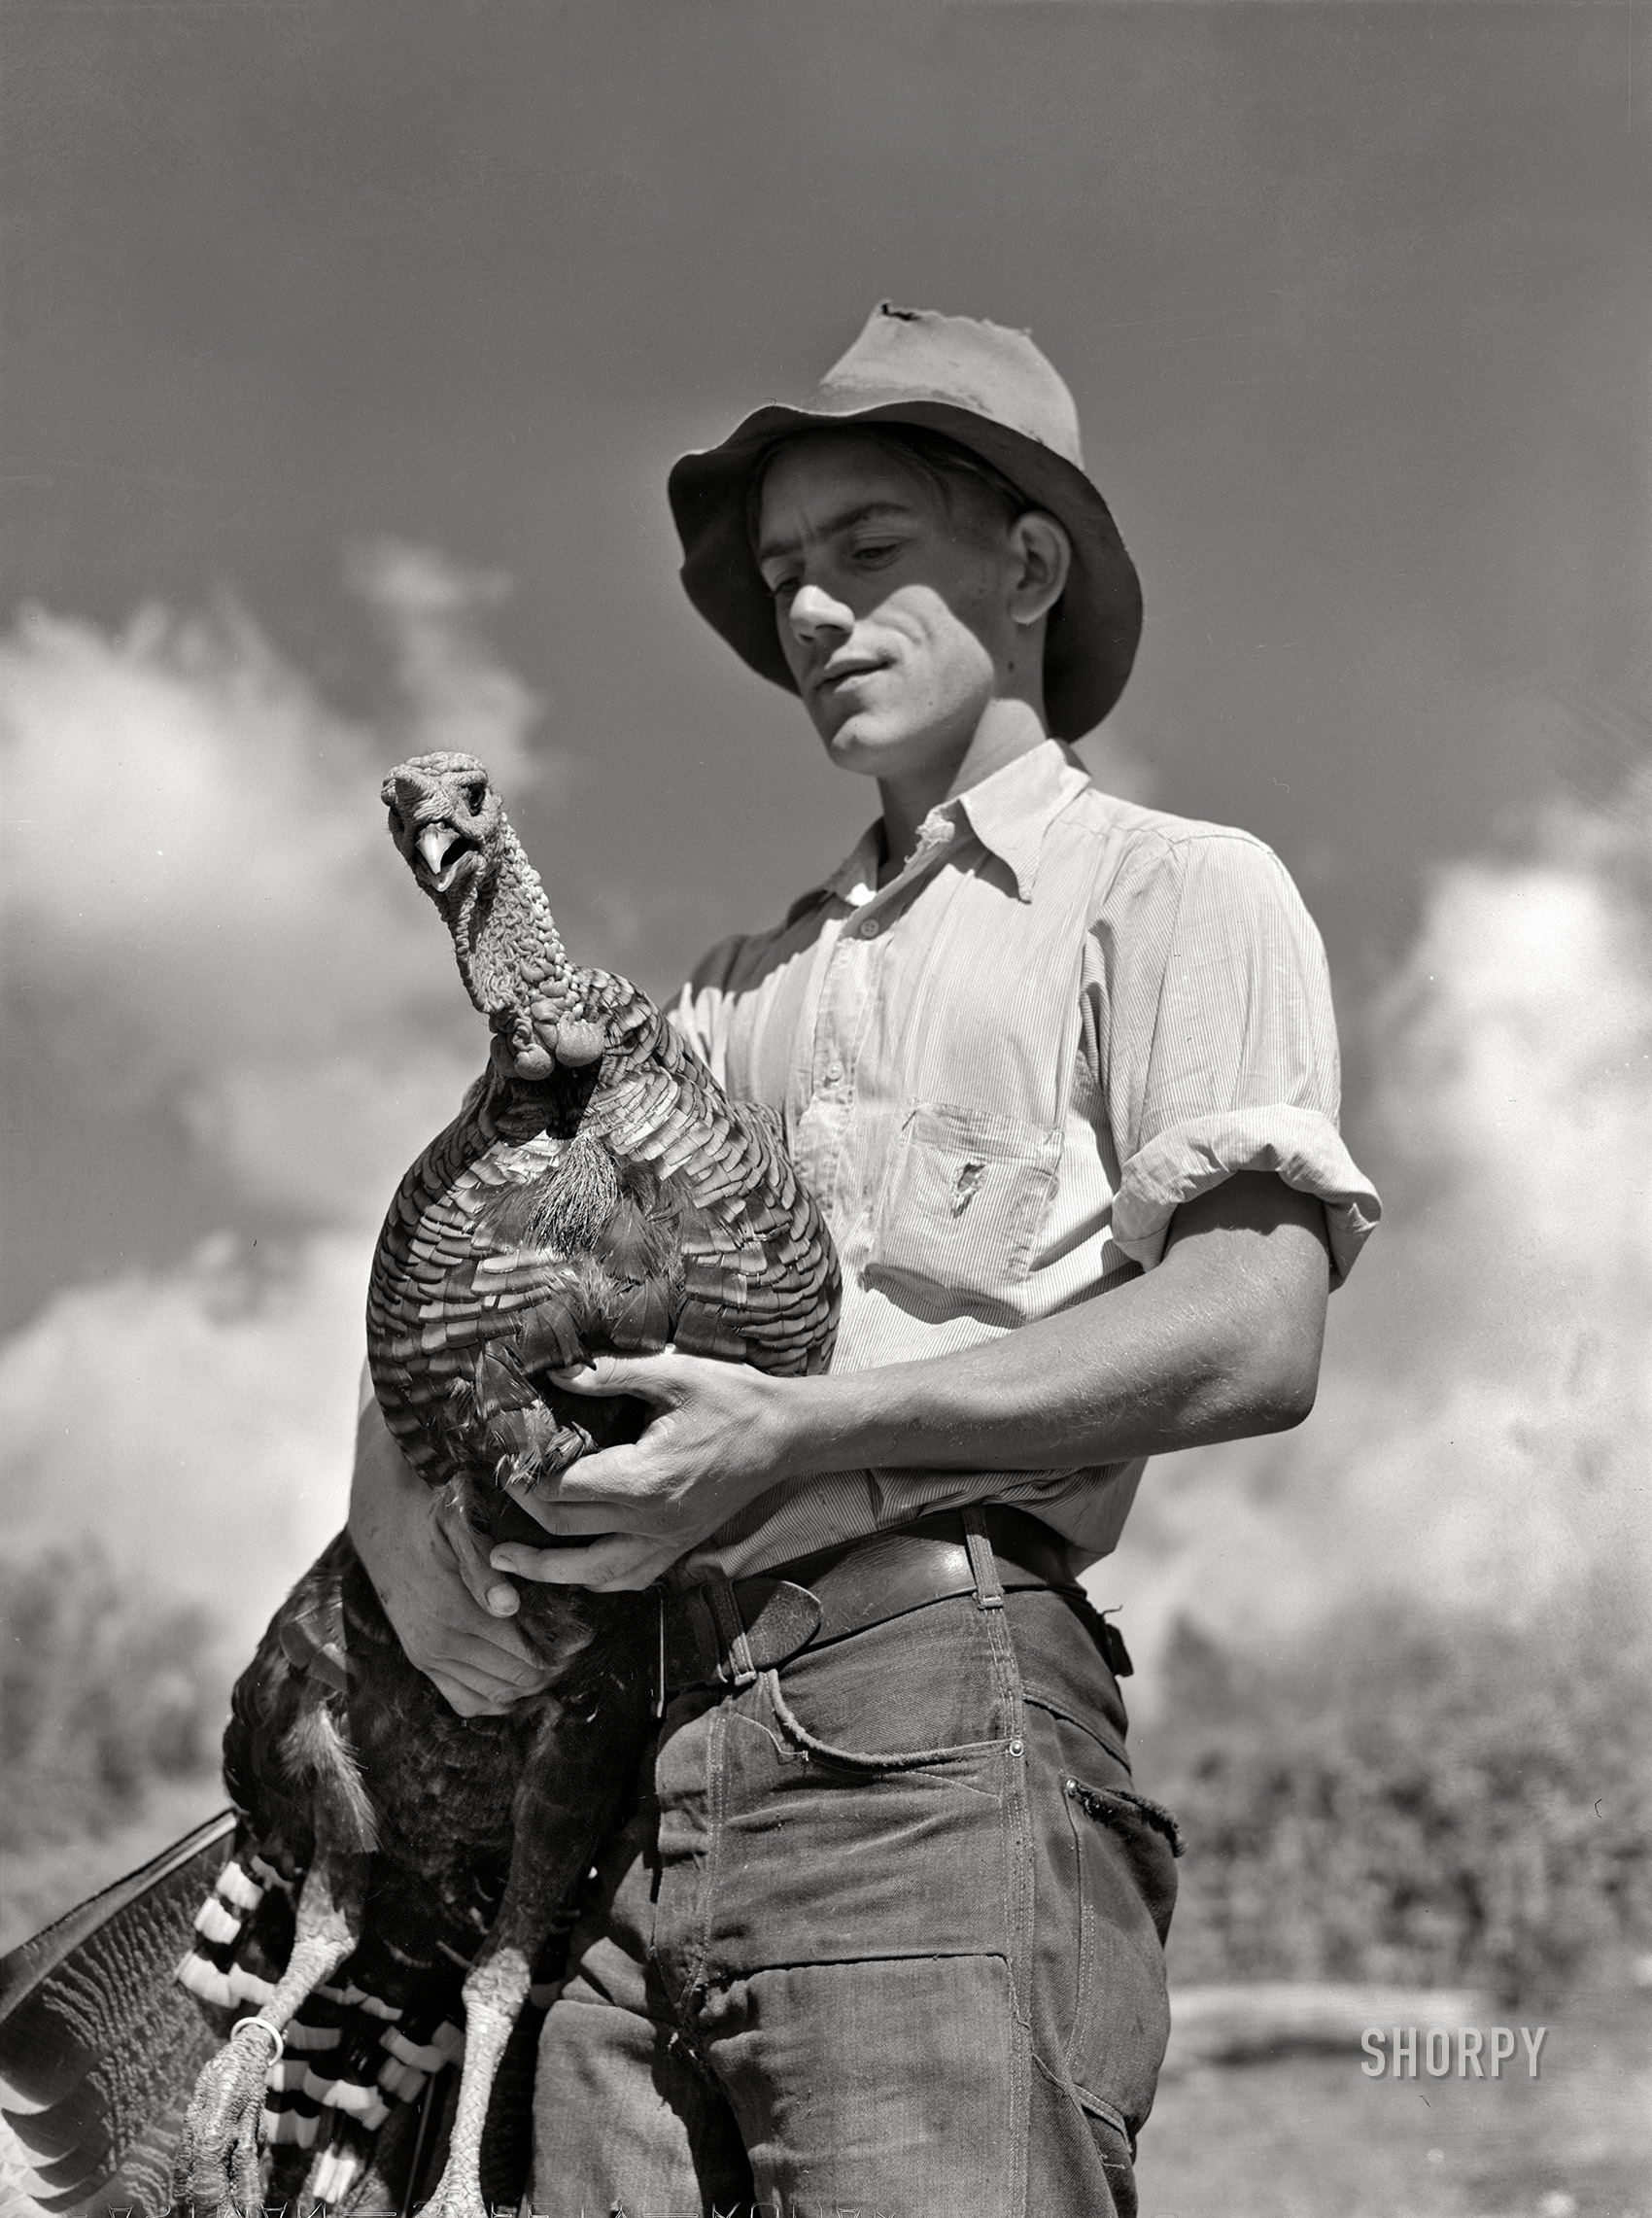 October 1939.  Chaffee County, Colorado. "Paul Arnold, son of FSA client. Herding turkeys." Gobbler and gobblee. Photo by Arthur Rothstein, Farm Security Administration. View full size.